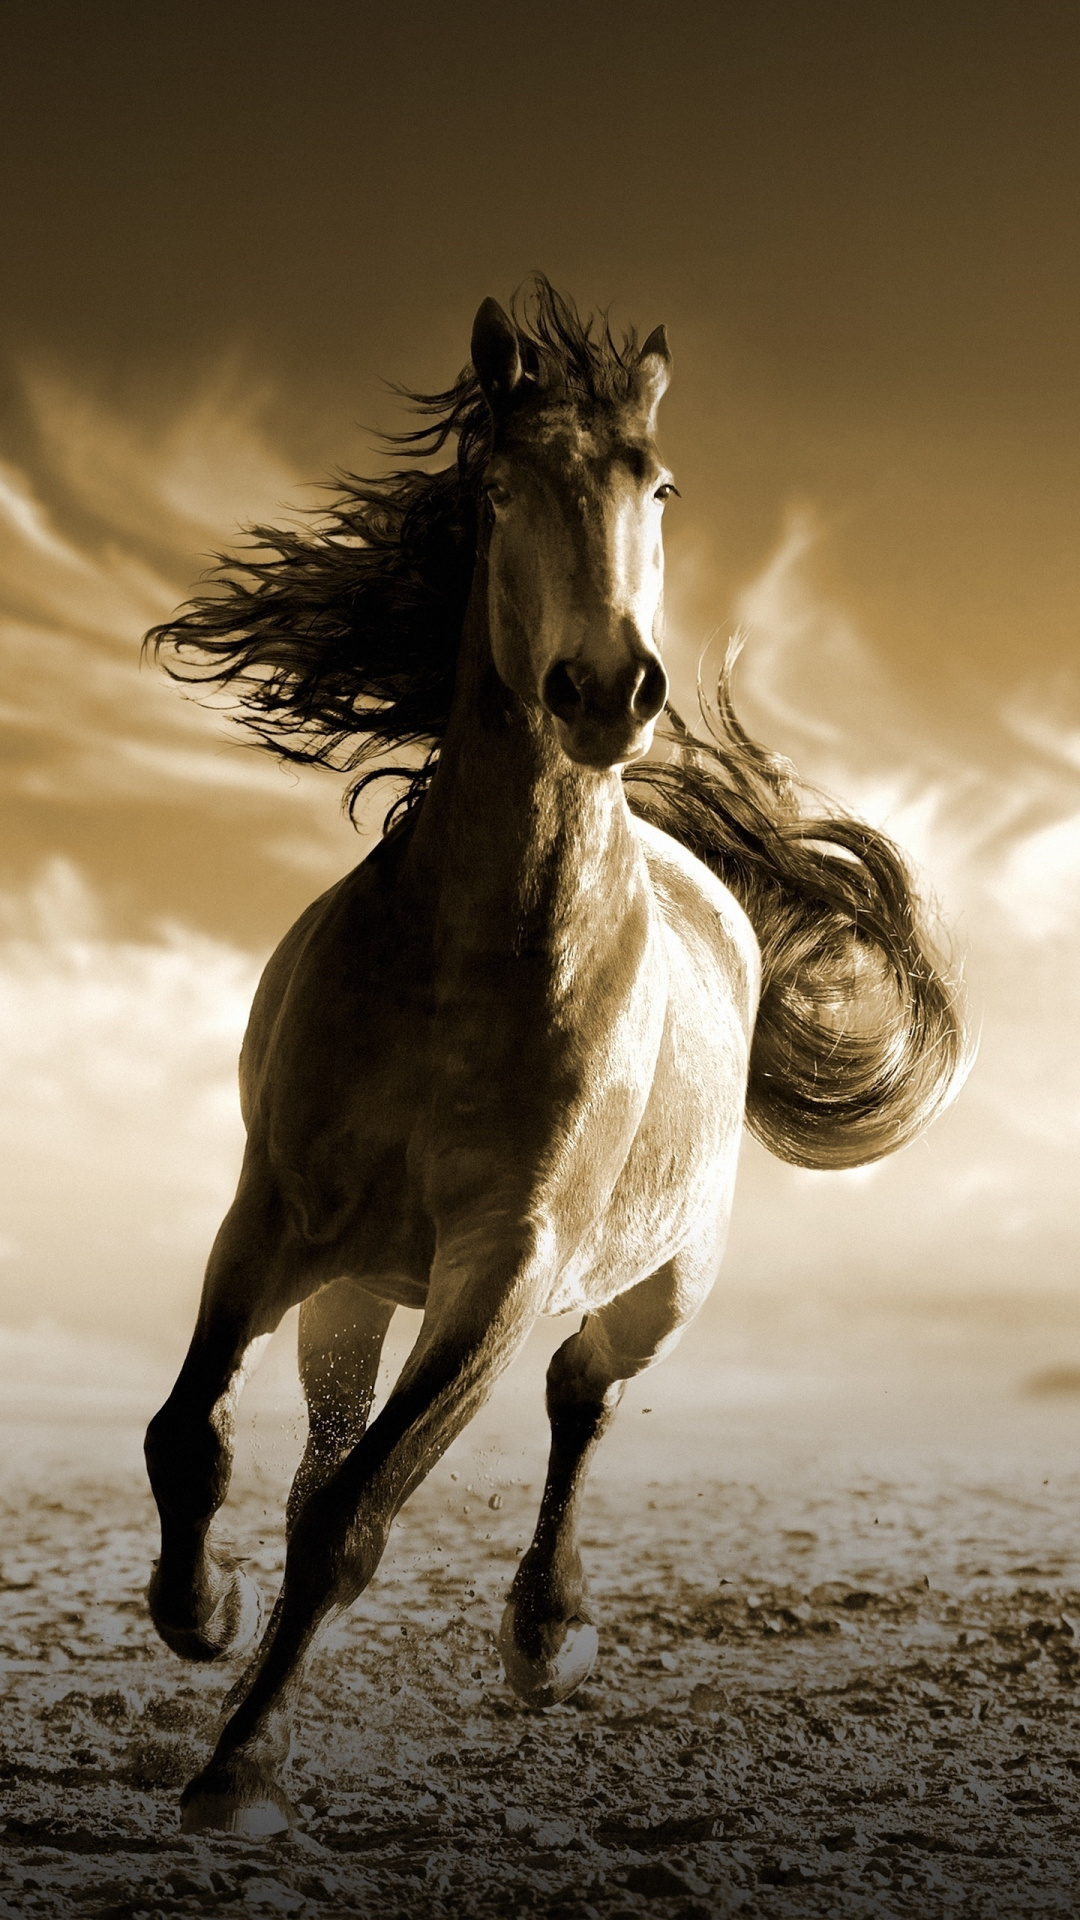 Horse: Yearling in a gallop, Equestrianism. 1080x1920 Full HD Background.